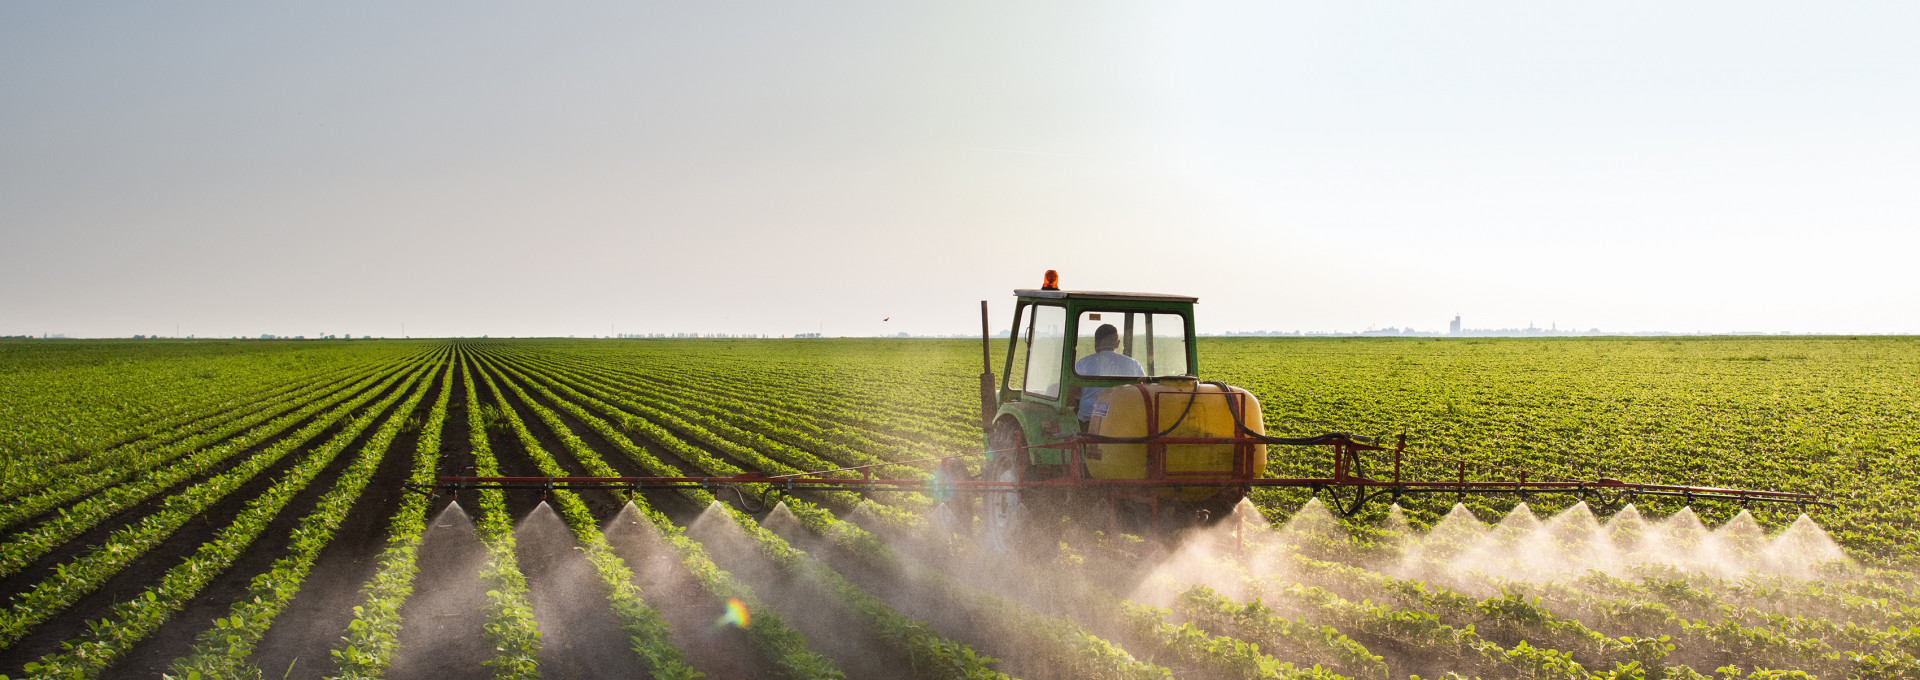 A tractor sprays pesticides on an agricultural field